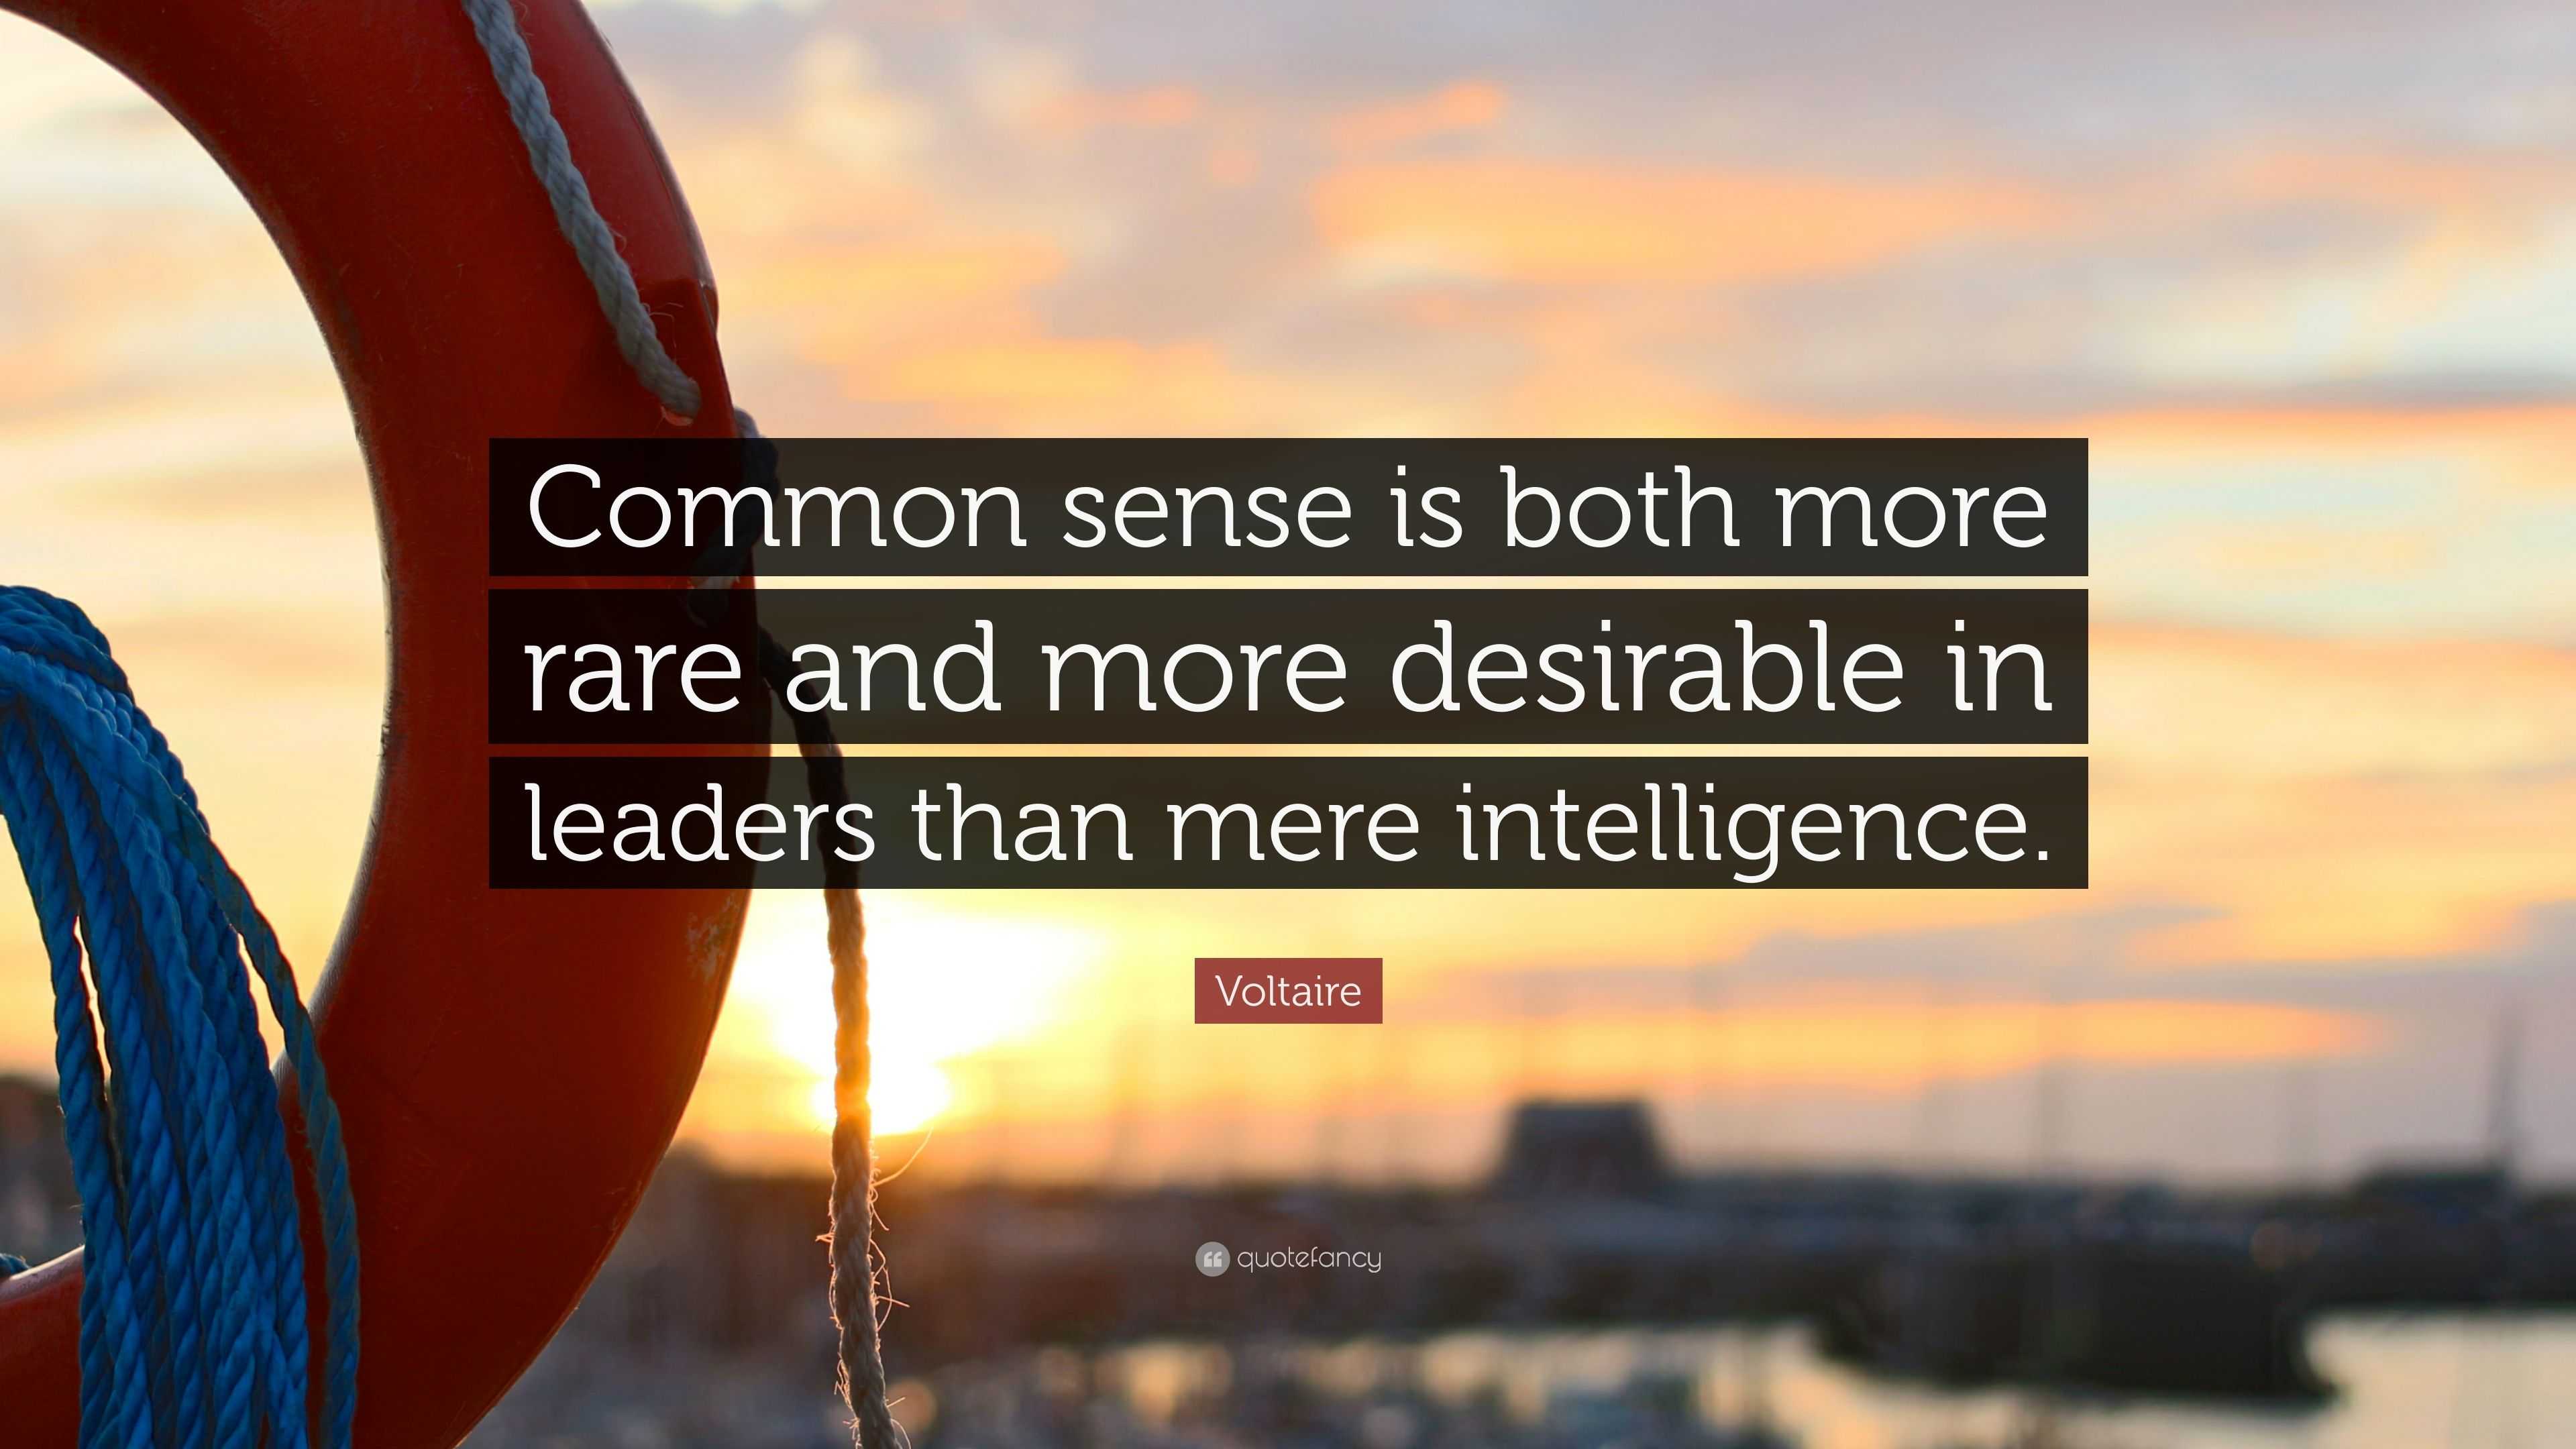 Voltaire Quote: “Common sense is both more rare and more desirable in ...